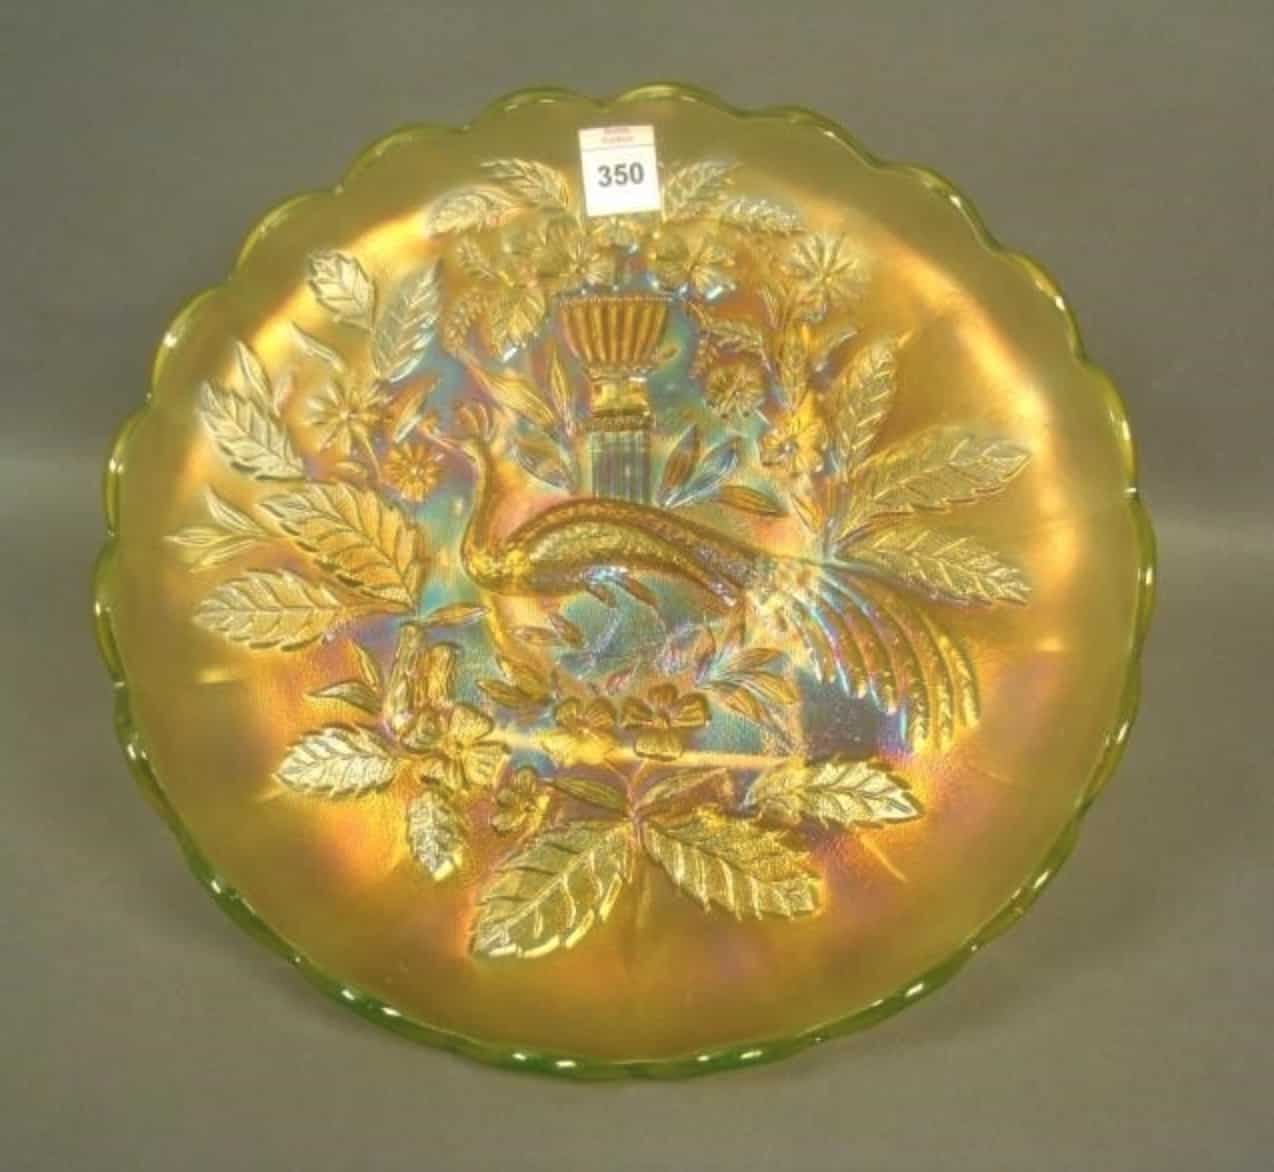 Peacock and Urn bowl